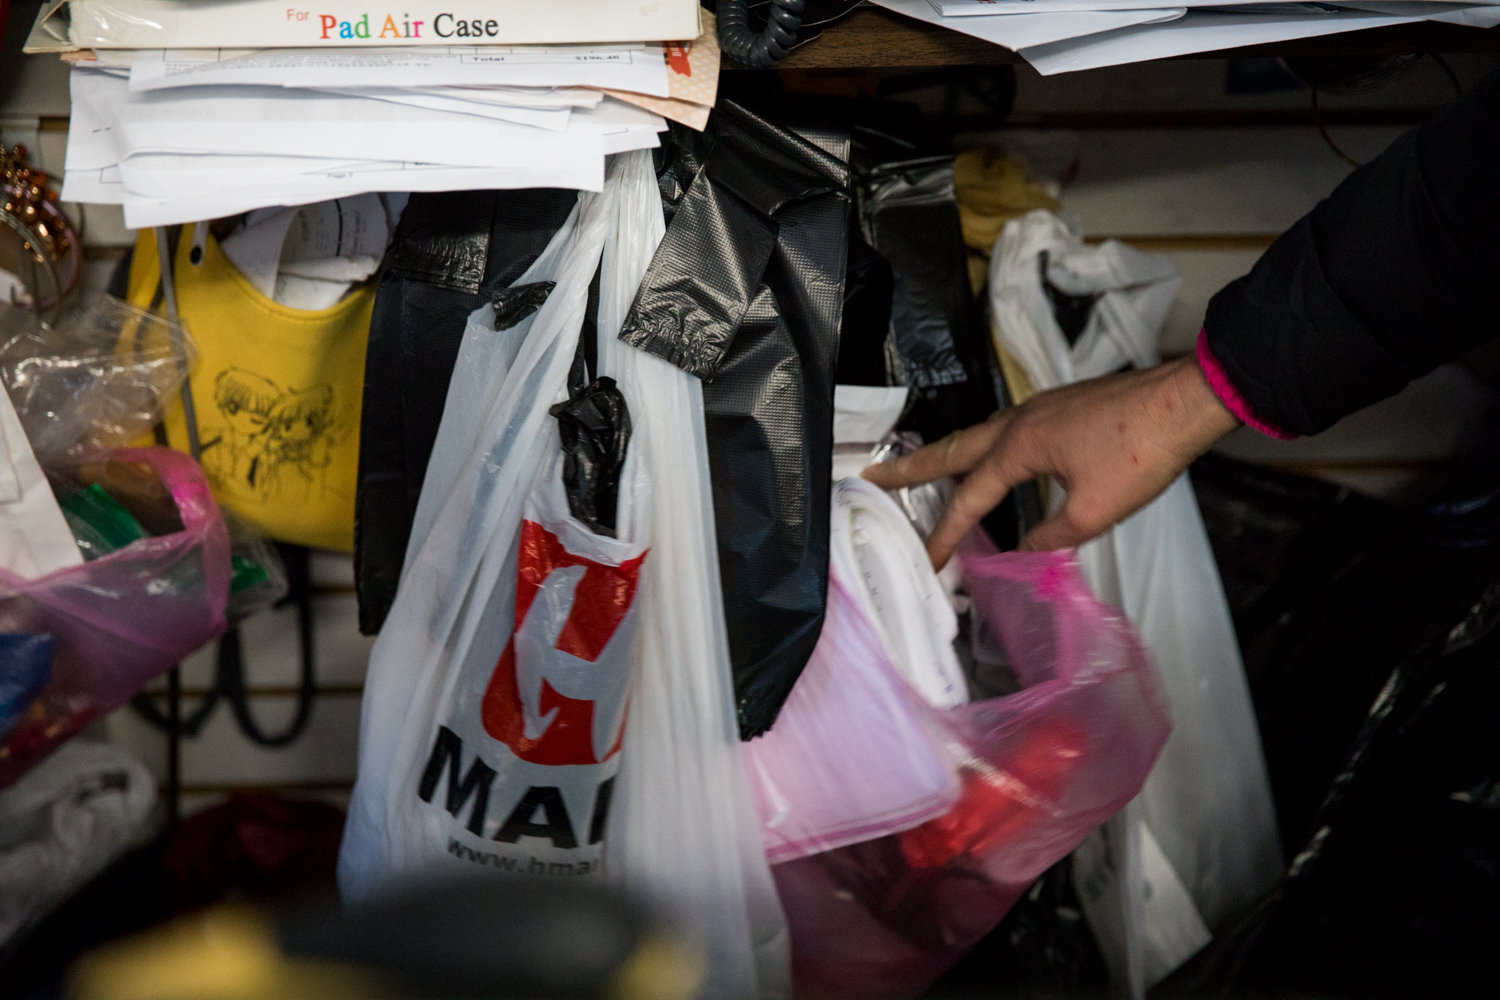 Kay Lin isn’t worried about having to make the switch to paper bags at Family Discount on Riverdale Avenue. The purchases at her store tend to be small, and some of her customers simply carry them out. Others bring their own bags.